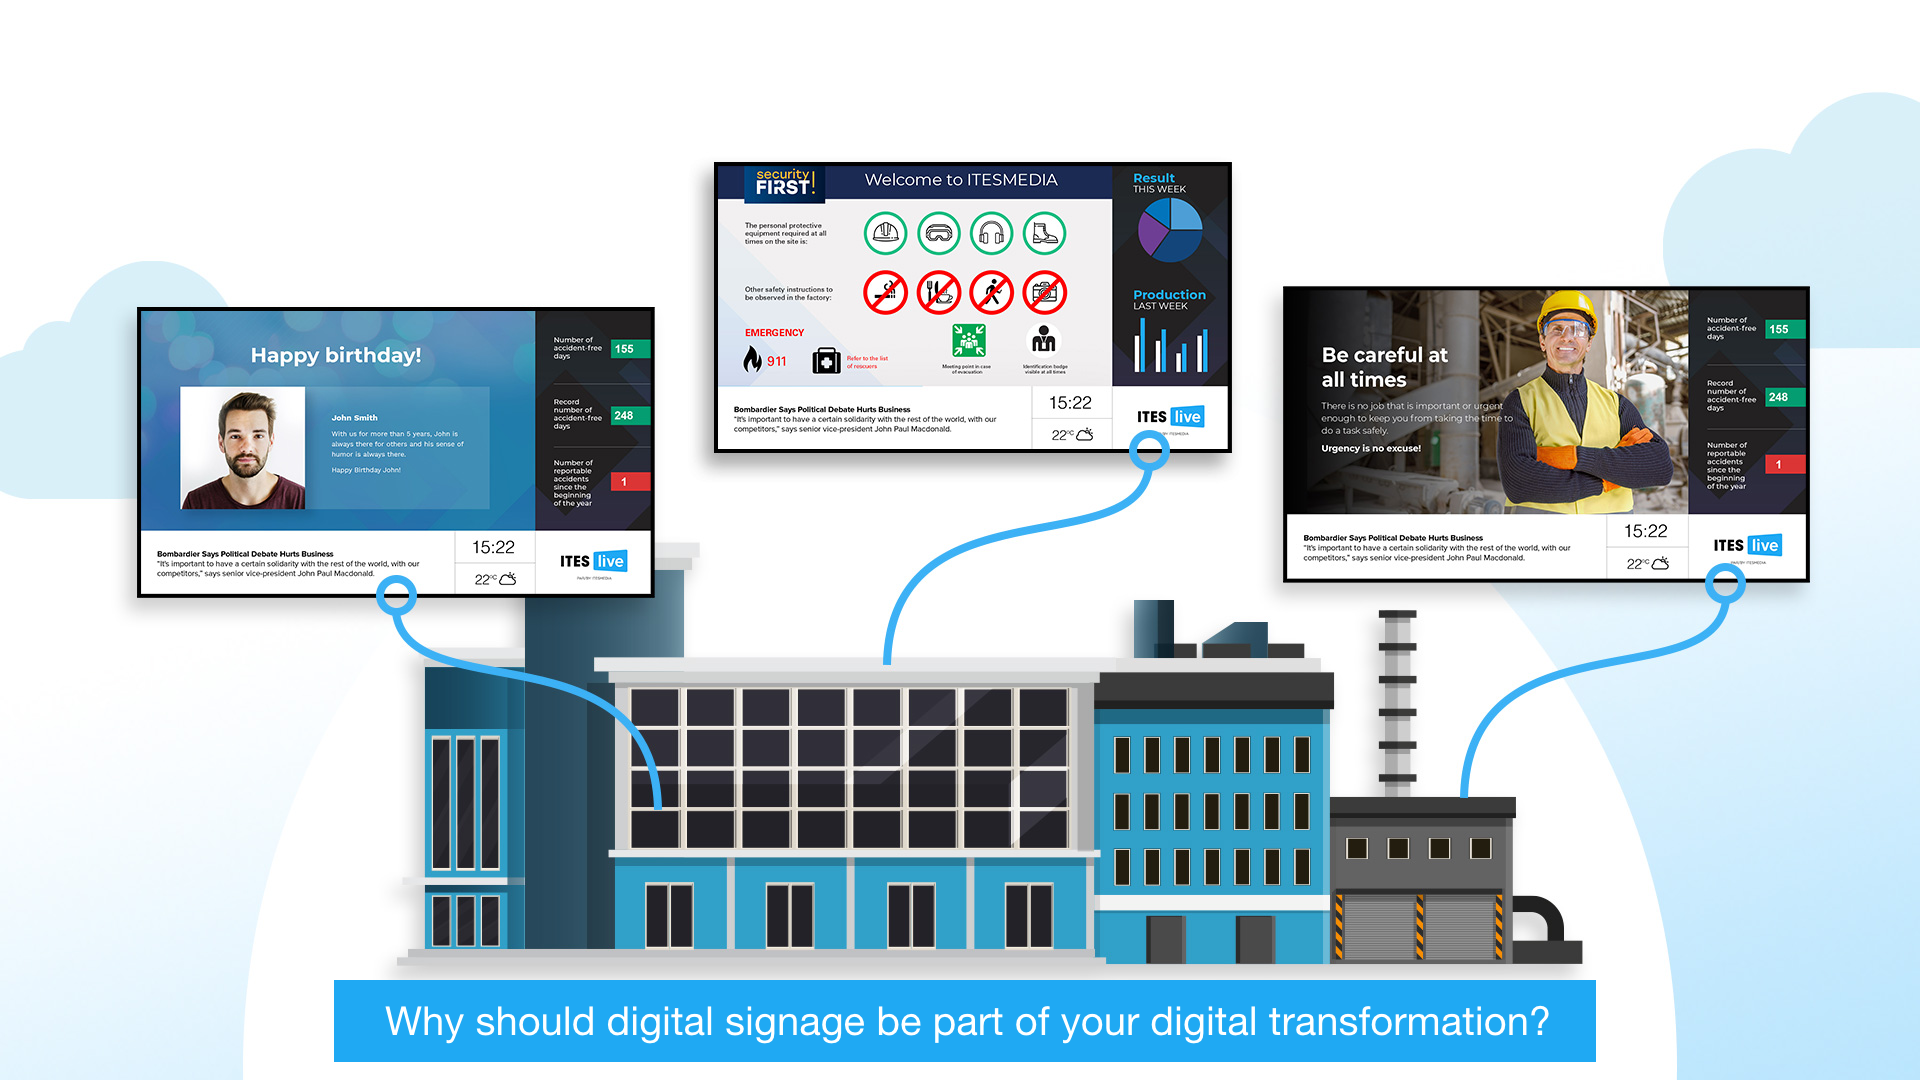 Why should digital signage be part of your digital transformation?